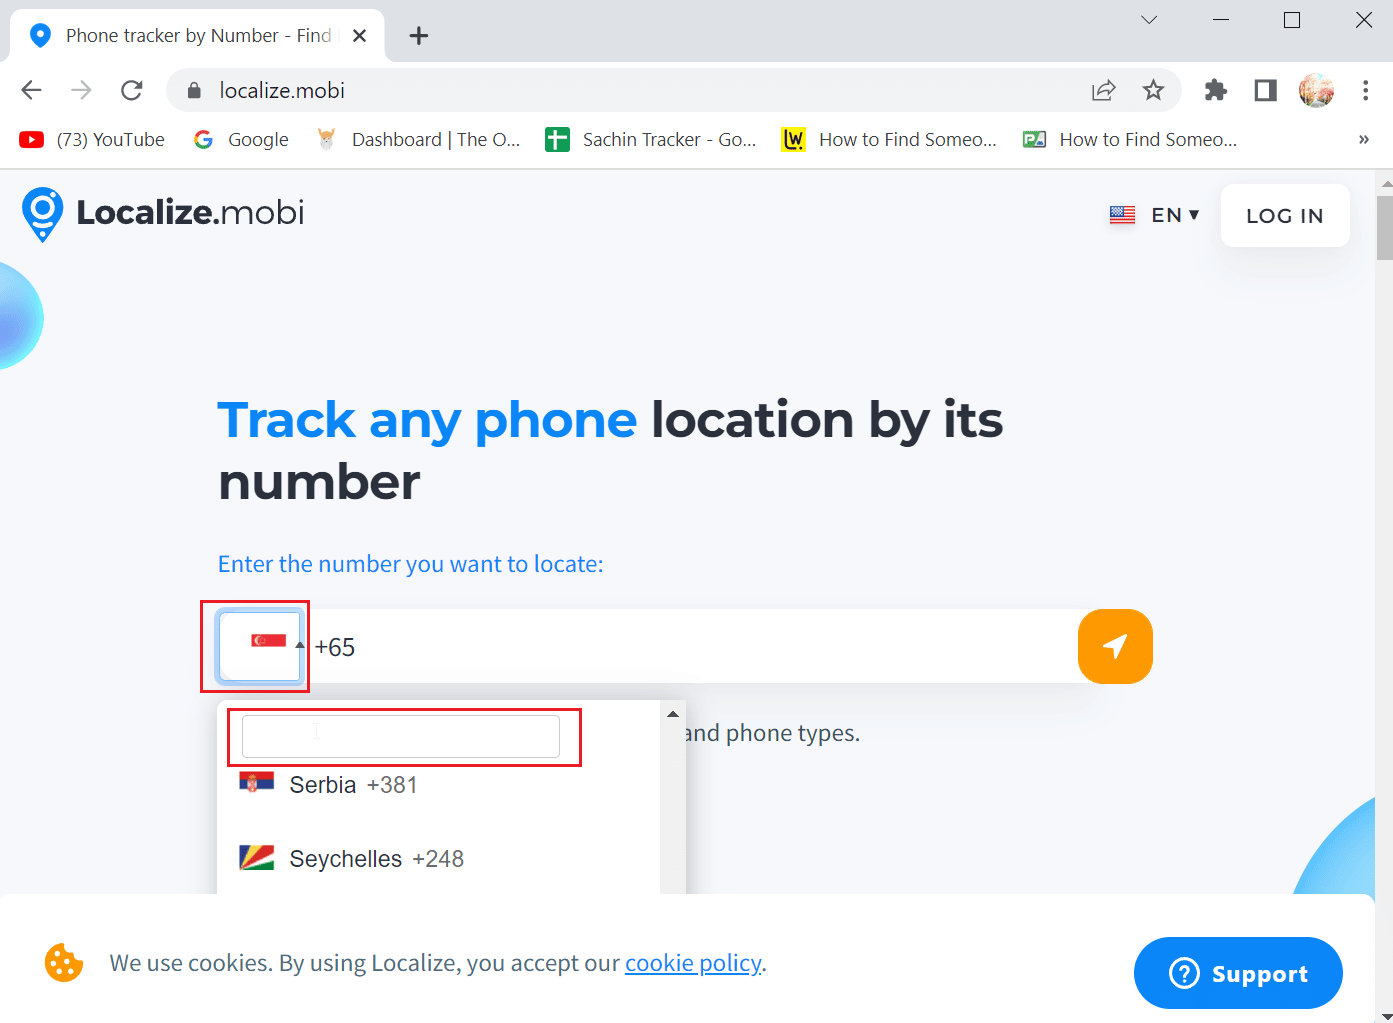 click on the country flag and search for your country and select it